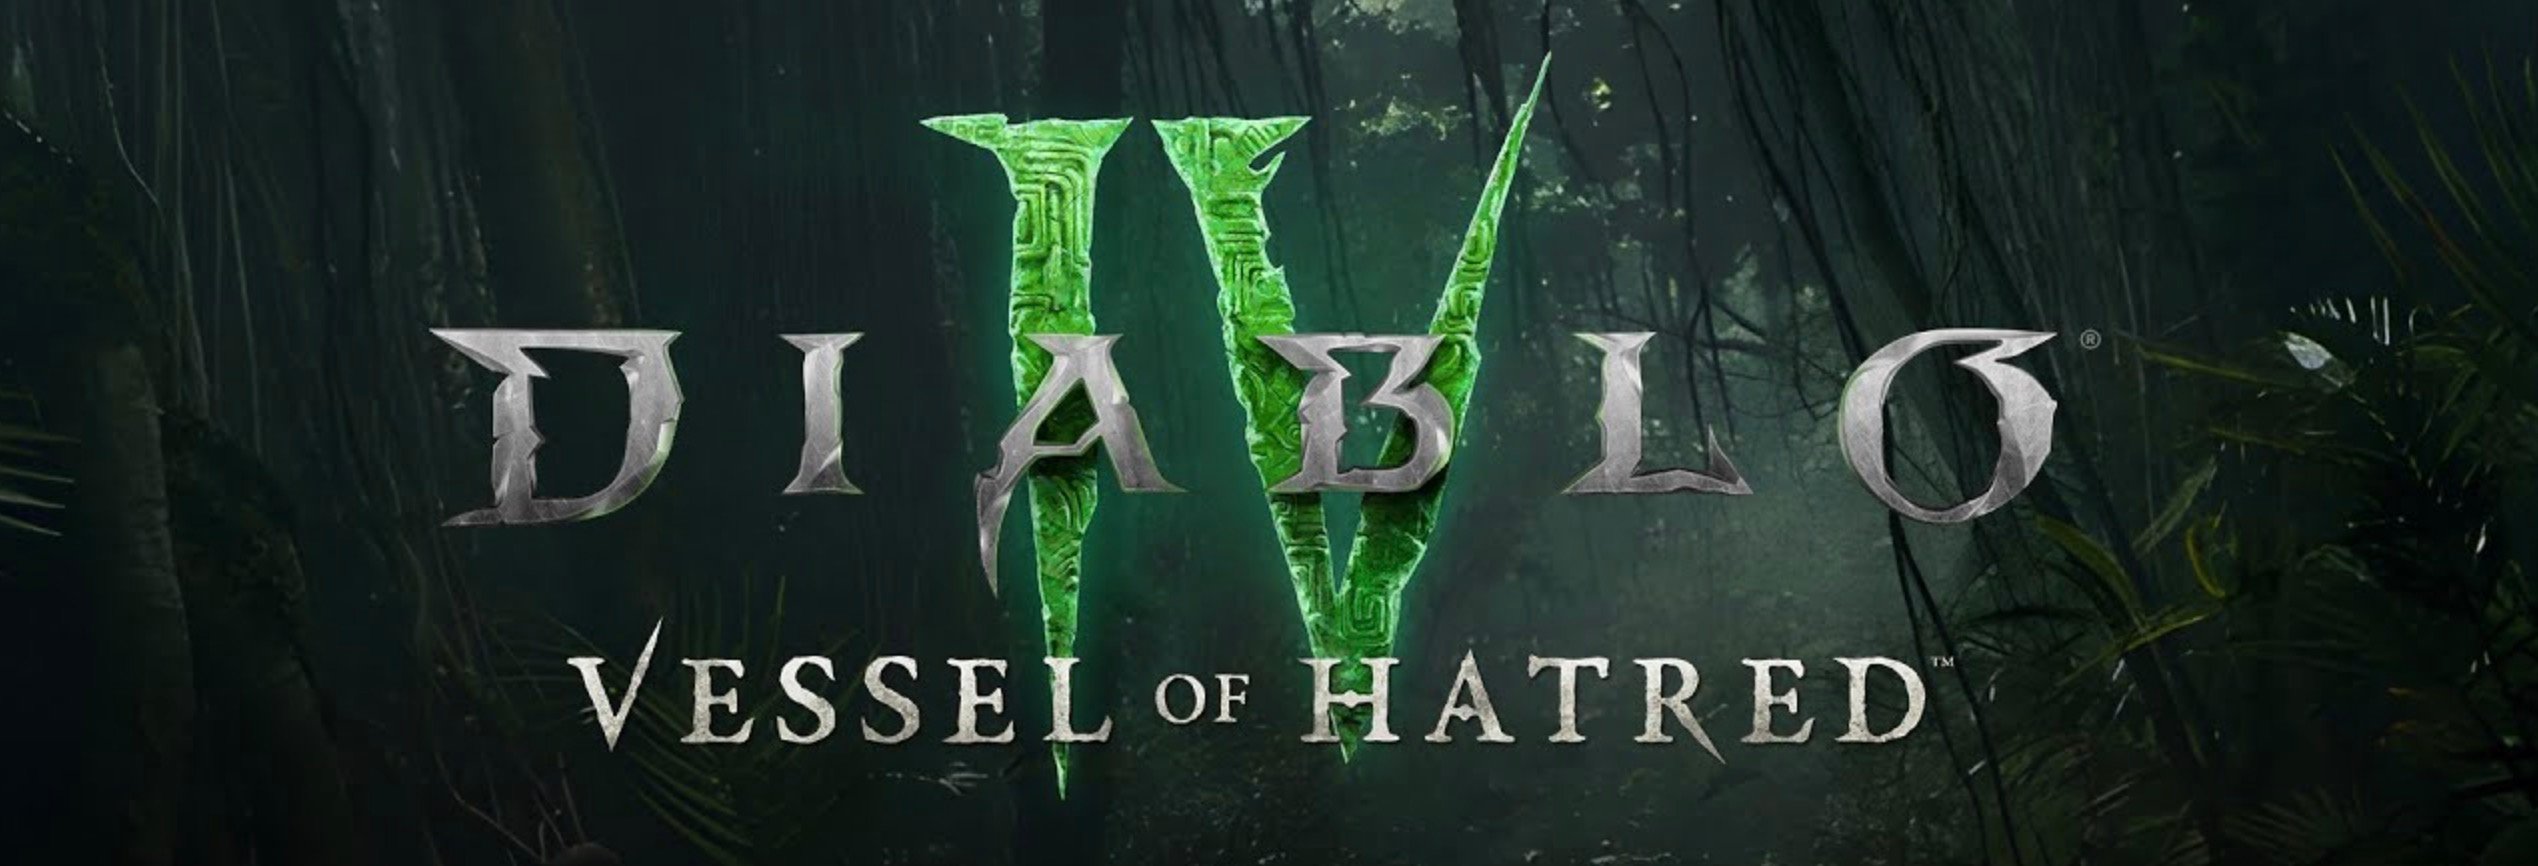 Vessel of Hatred Datamining: New Spiritborn Class, Mercenaries, New Skills for All Classes, and More